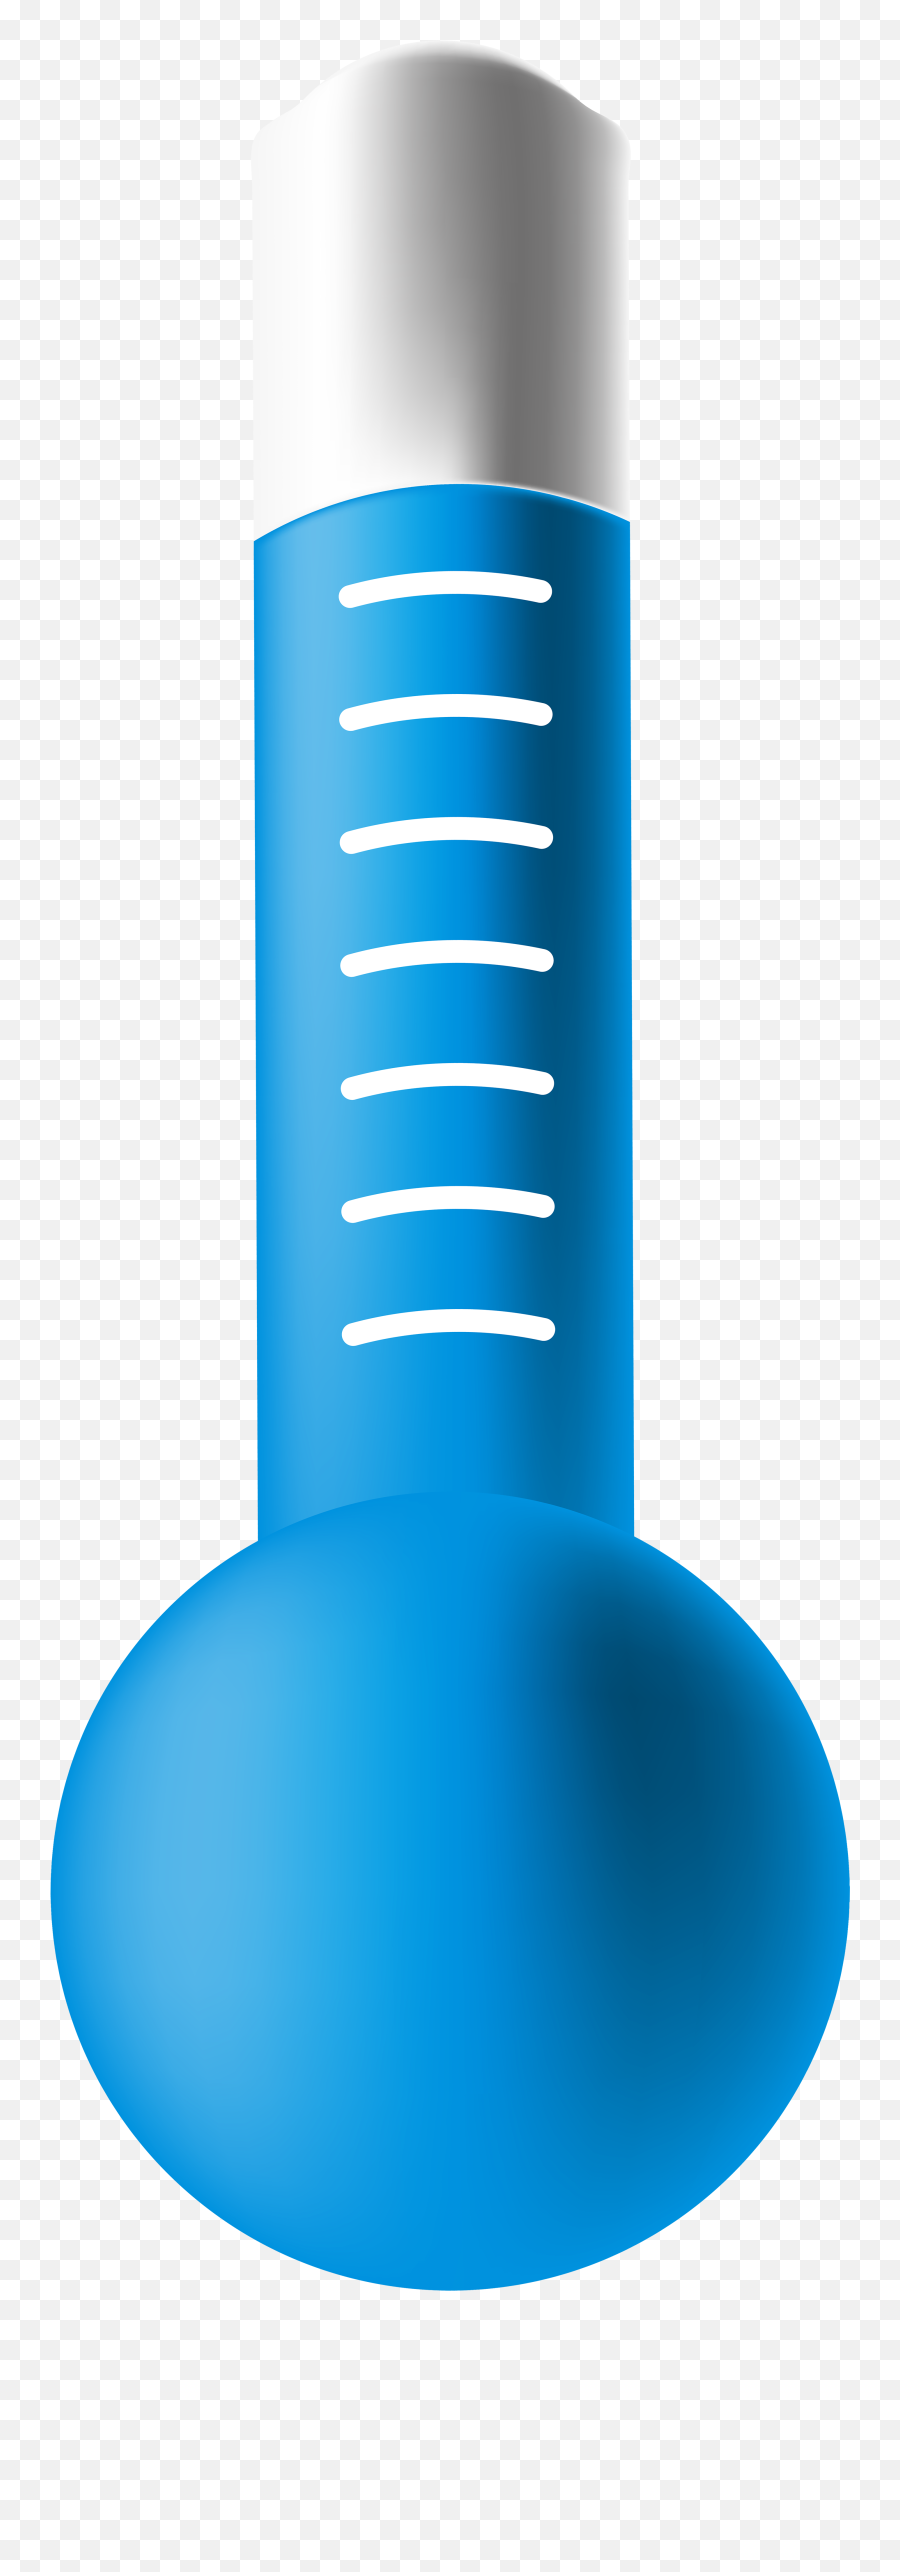 Thermometer Clipart Png - Circle,Thermometer Transparent Background